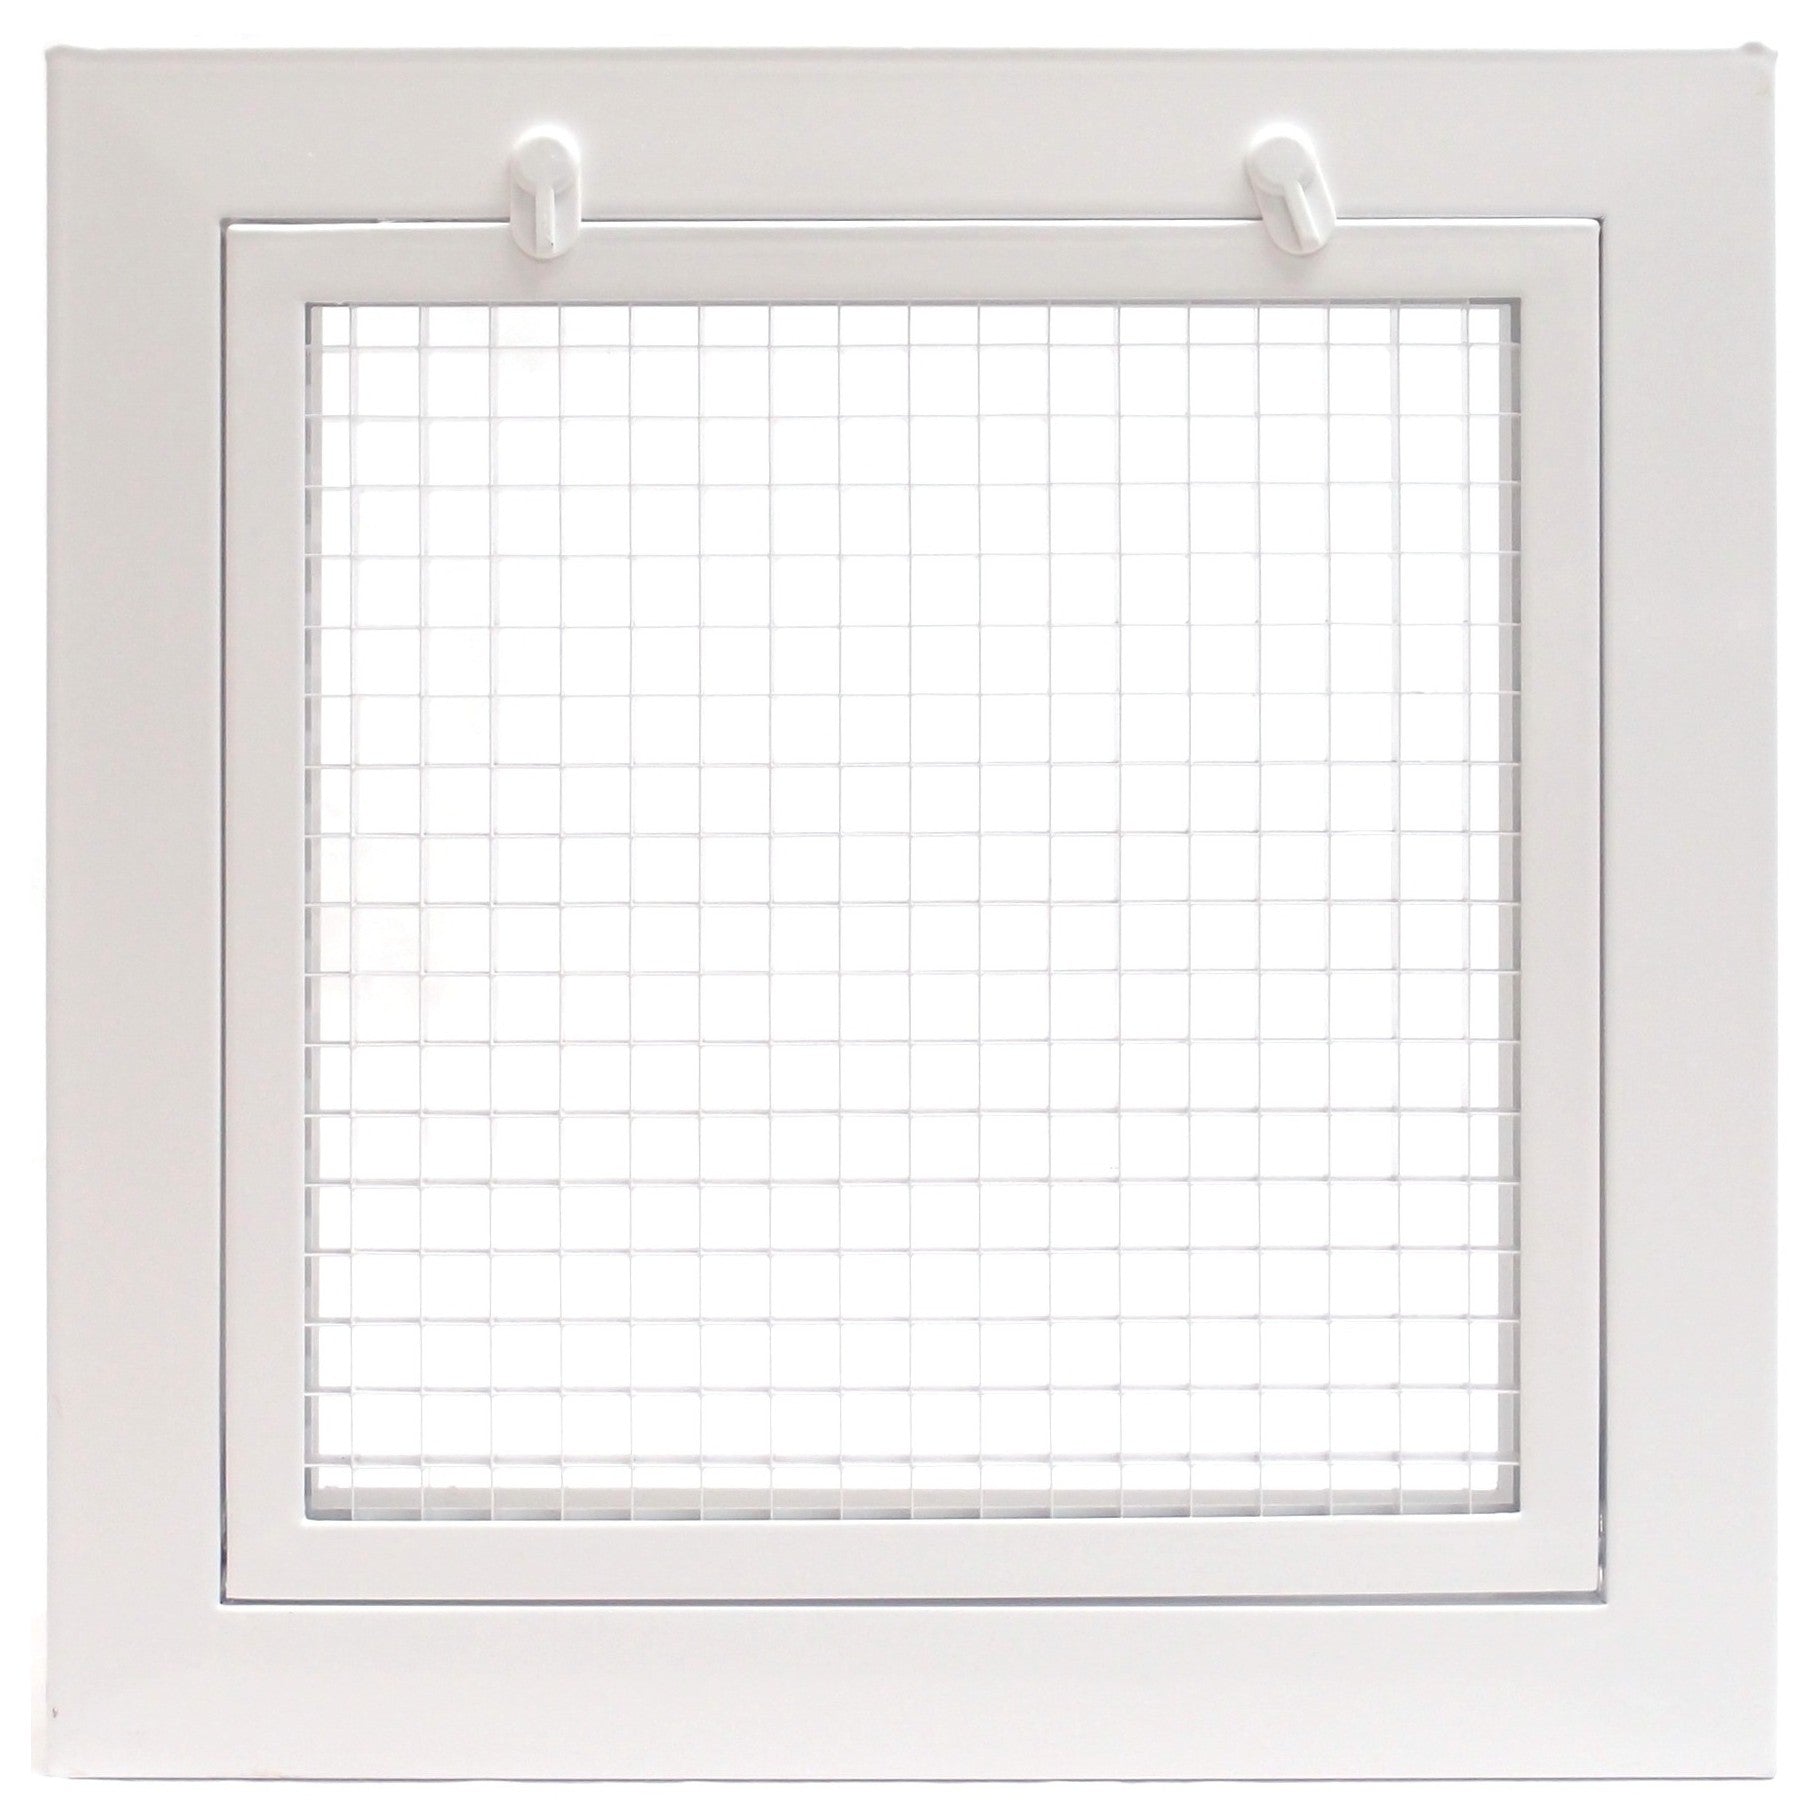 36" x 14" Cube Core Eggcrate Return Air Filter Grille for 1" Filter